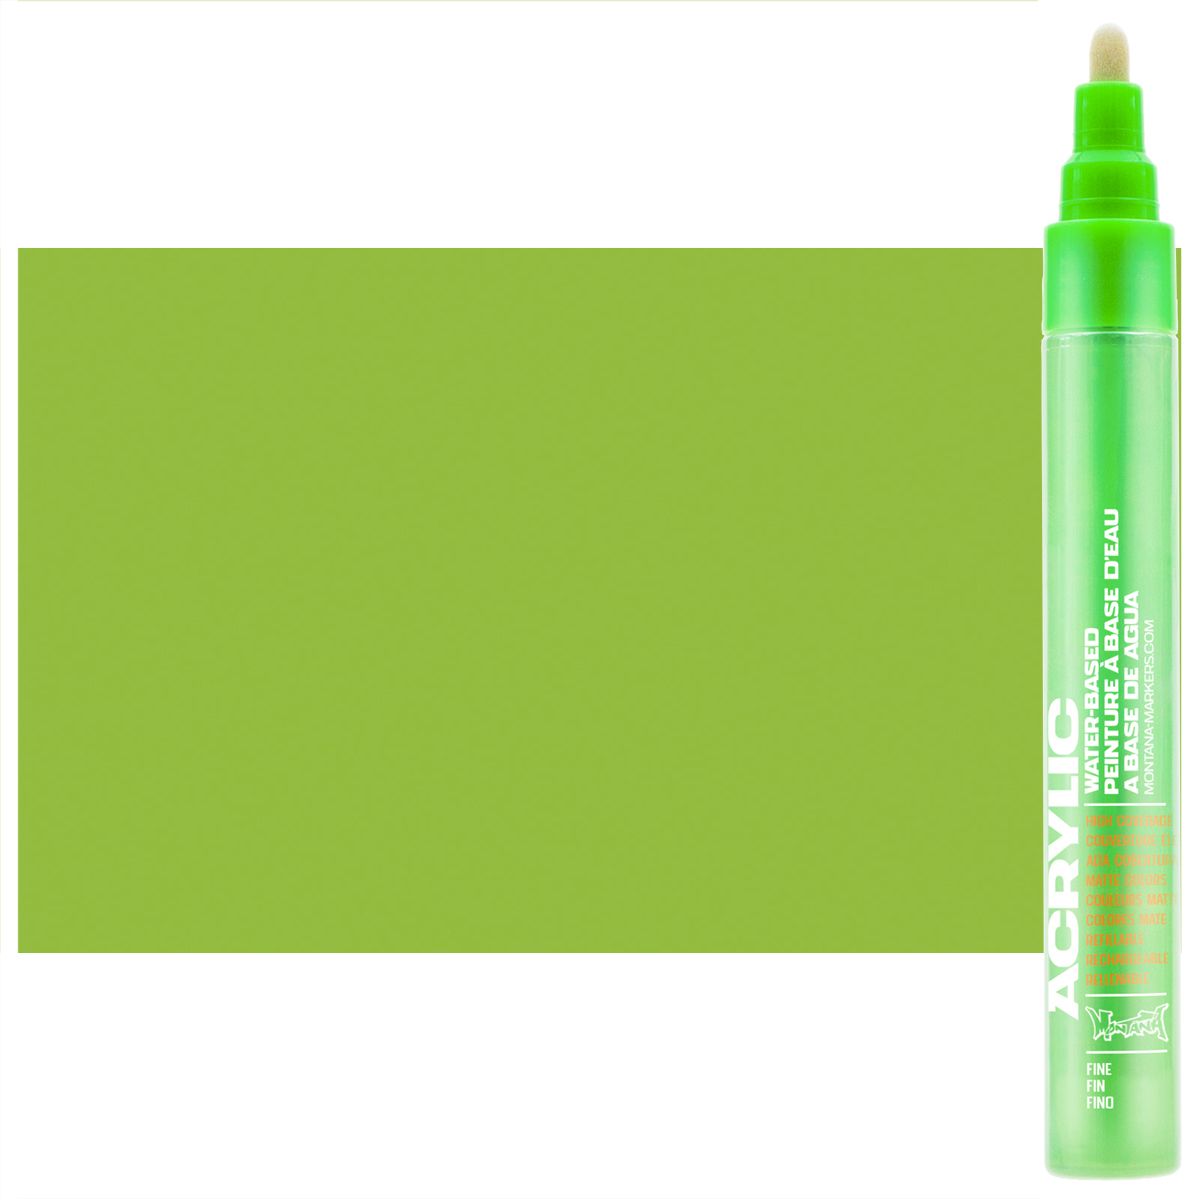 Montana refillable acrylic paint markers with replaceable tips - Acid Green